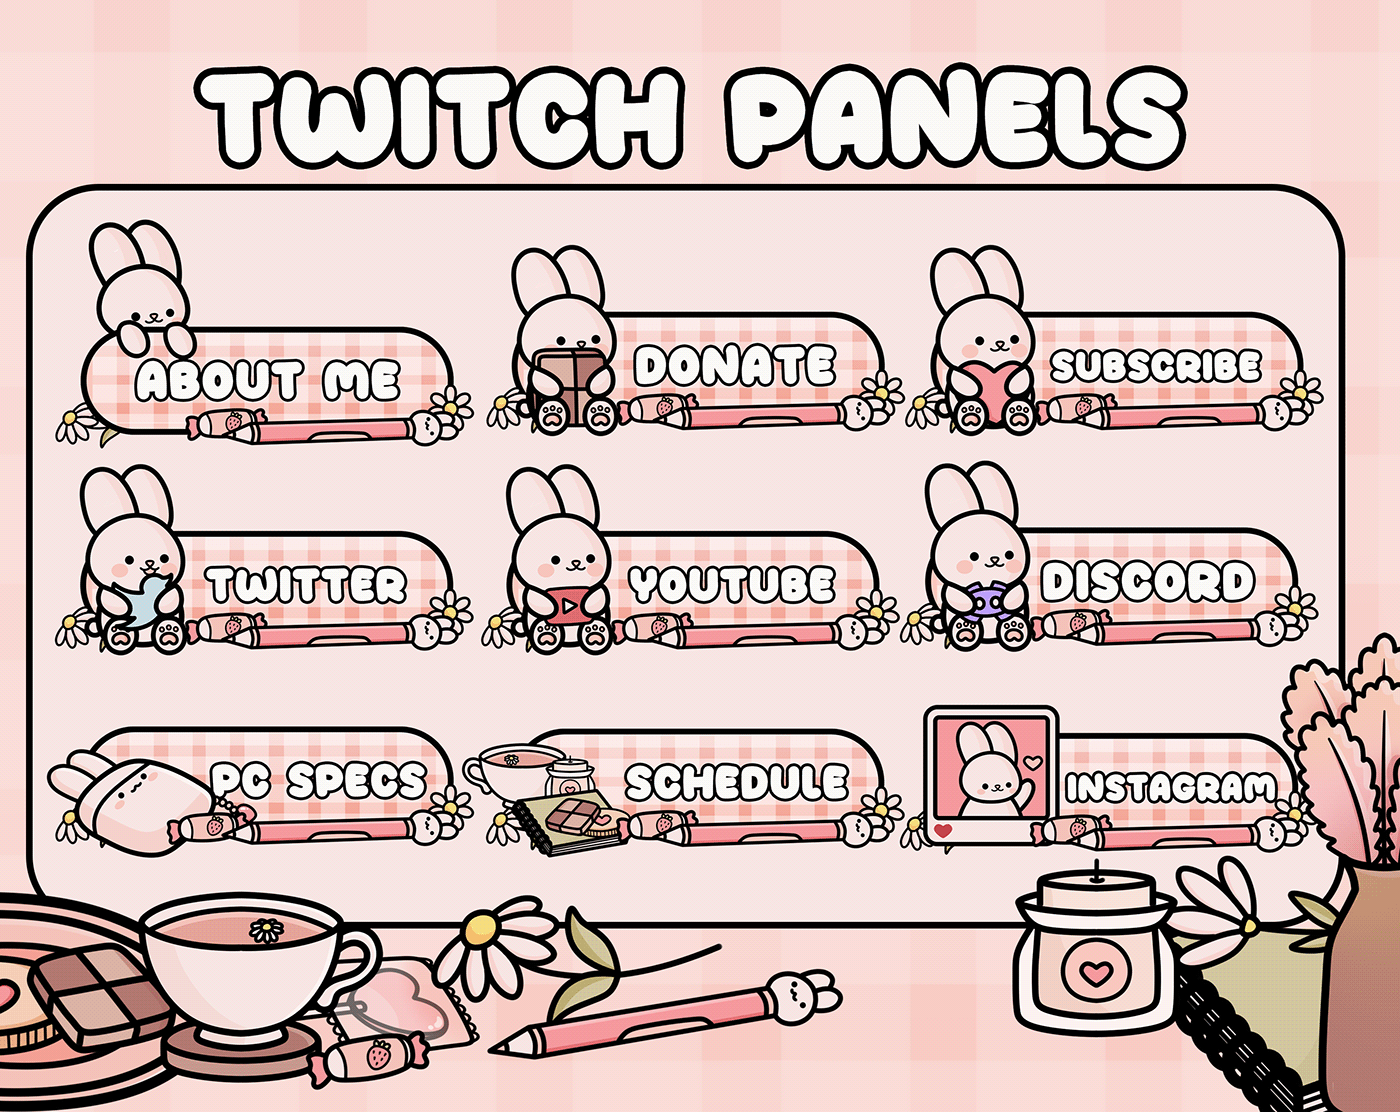 cute nintendo switch Overlay pink pink bunny stream overlay tiwtch overlay twitch design Twitch Panels Twitch Streamer Pack